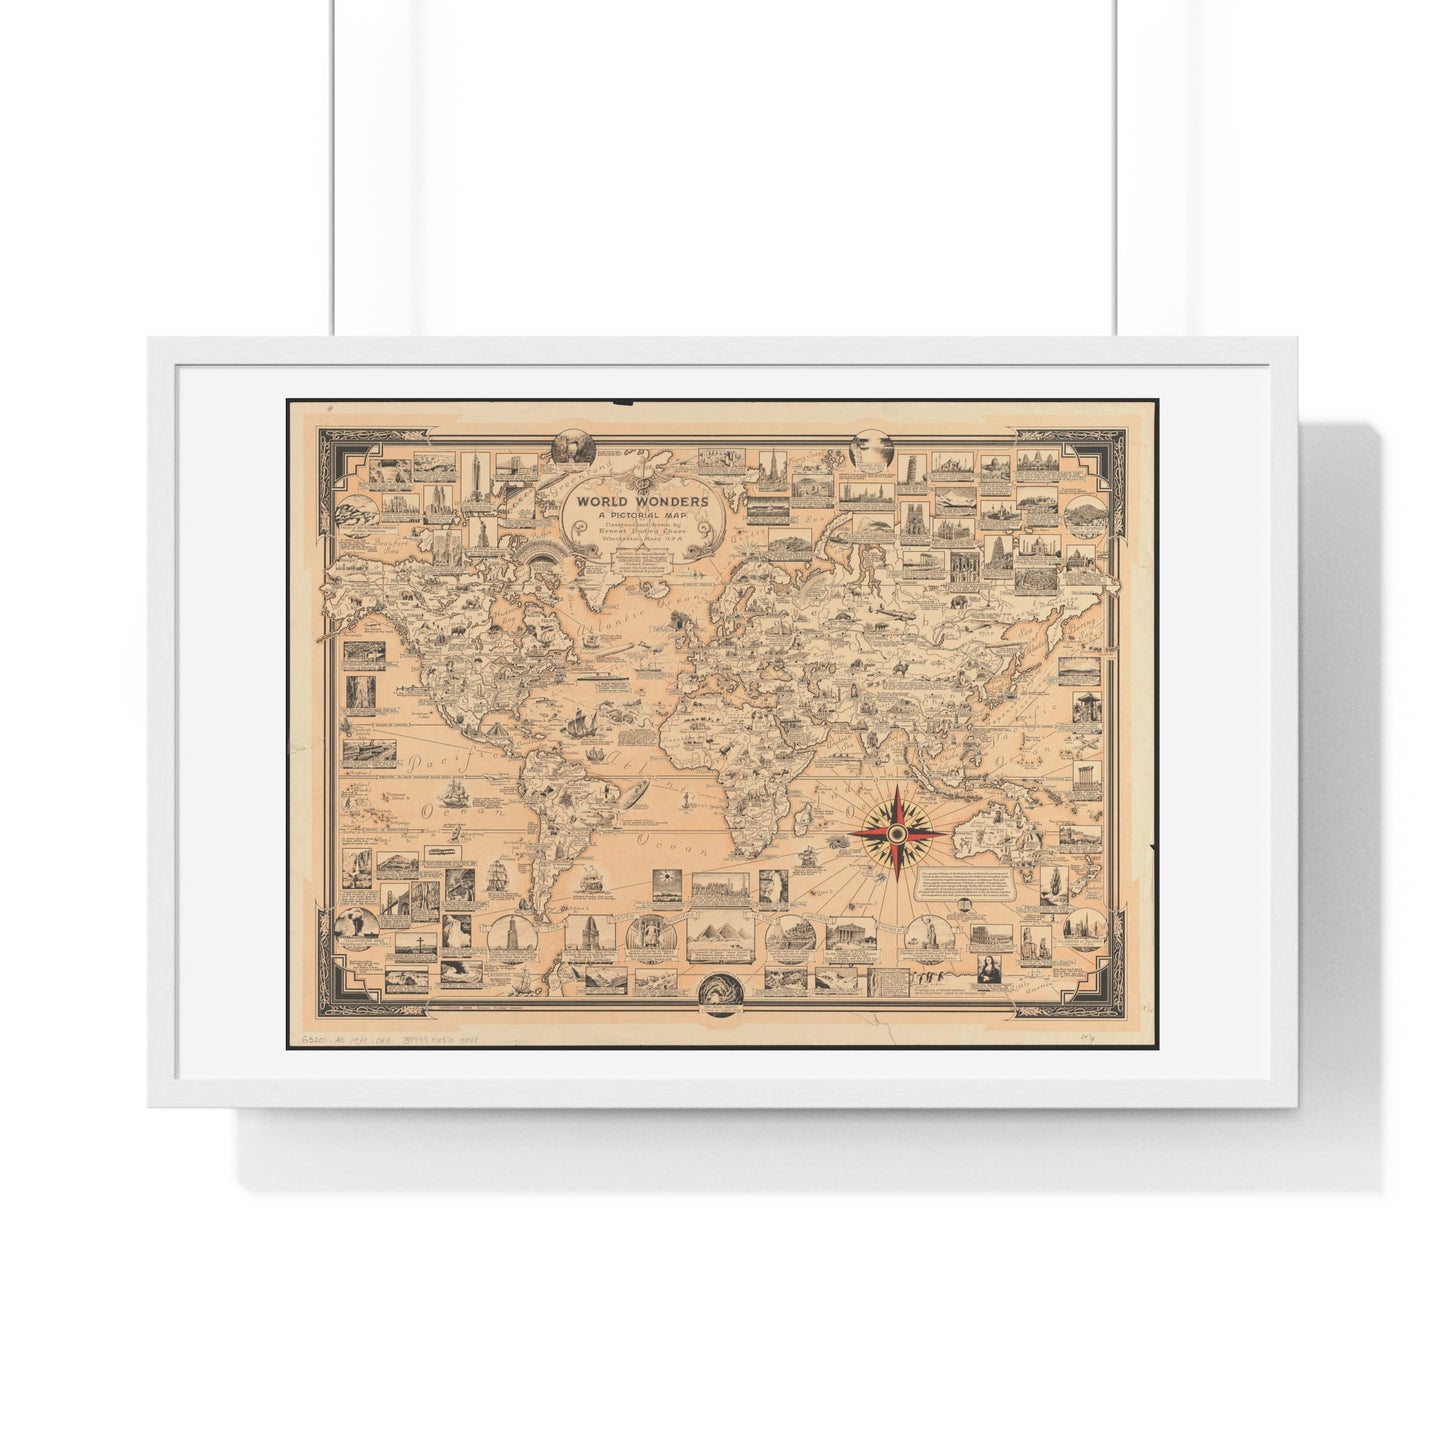 World Wonders, Pictorial Map of the World (1939) by Ernest Dudley Chase, from the Original, Framed Art Print